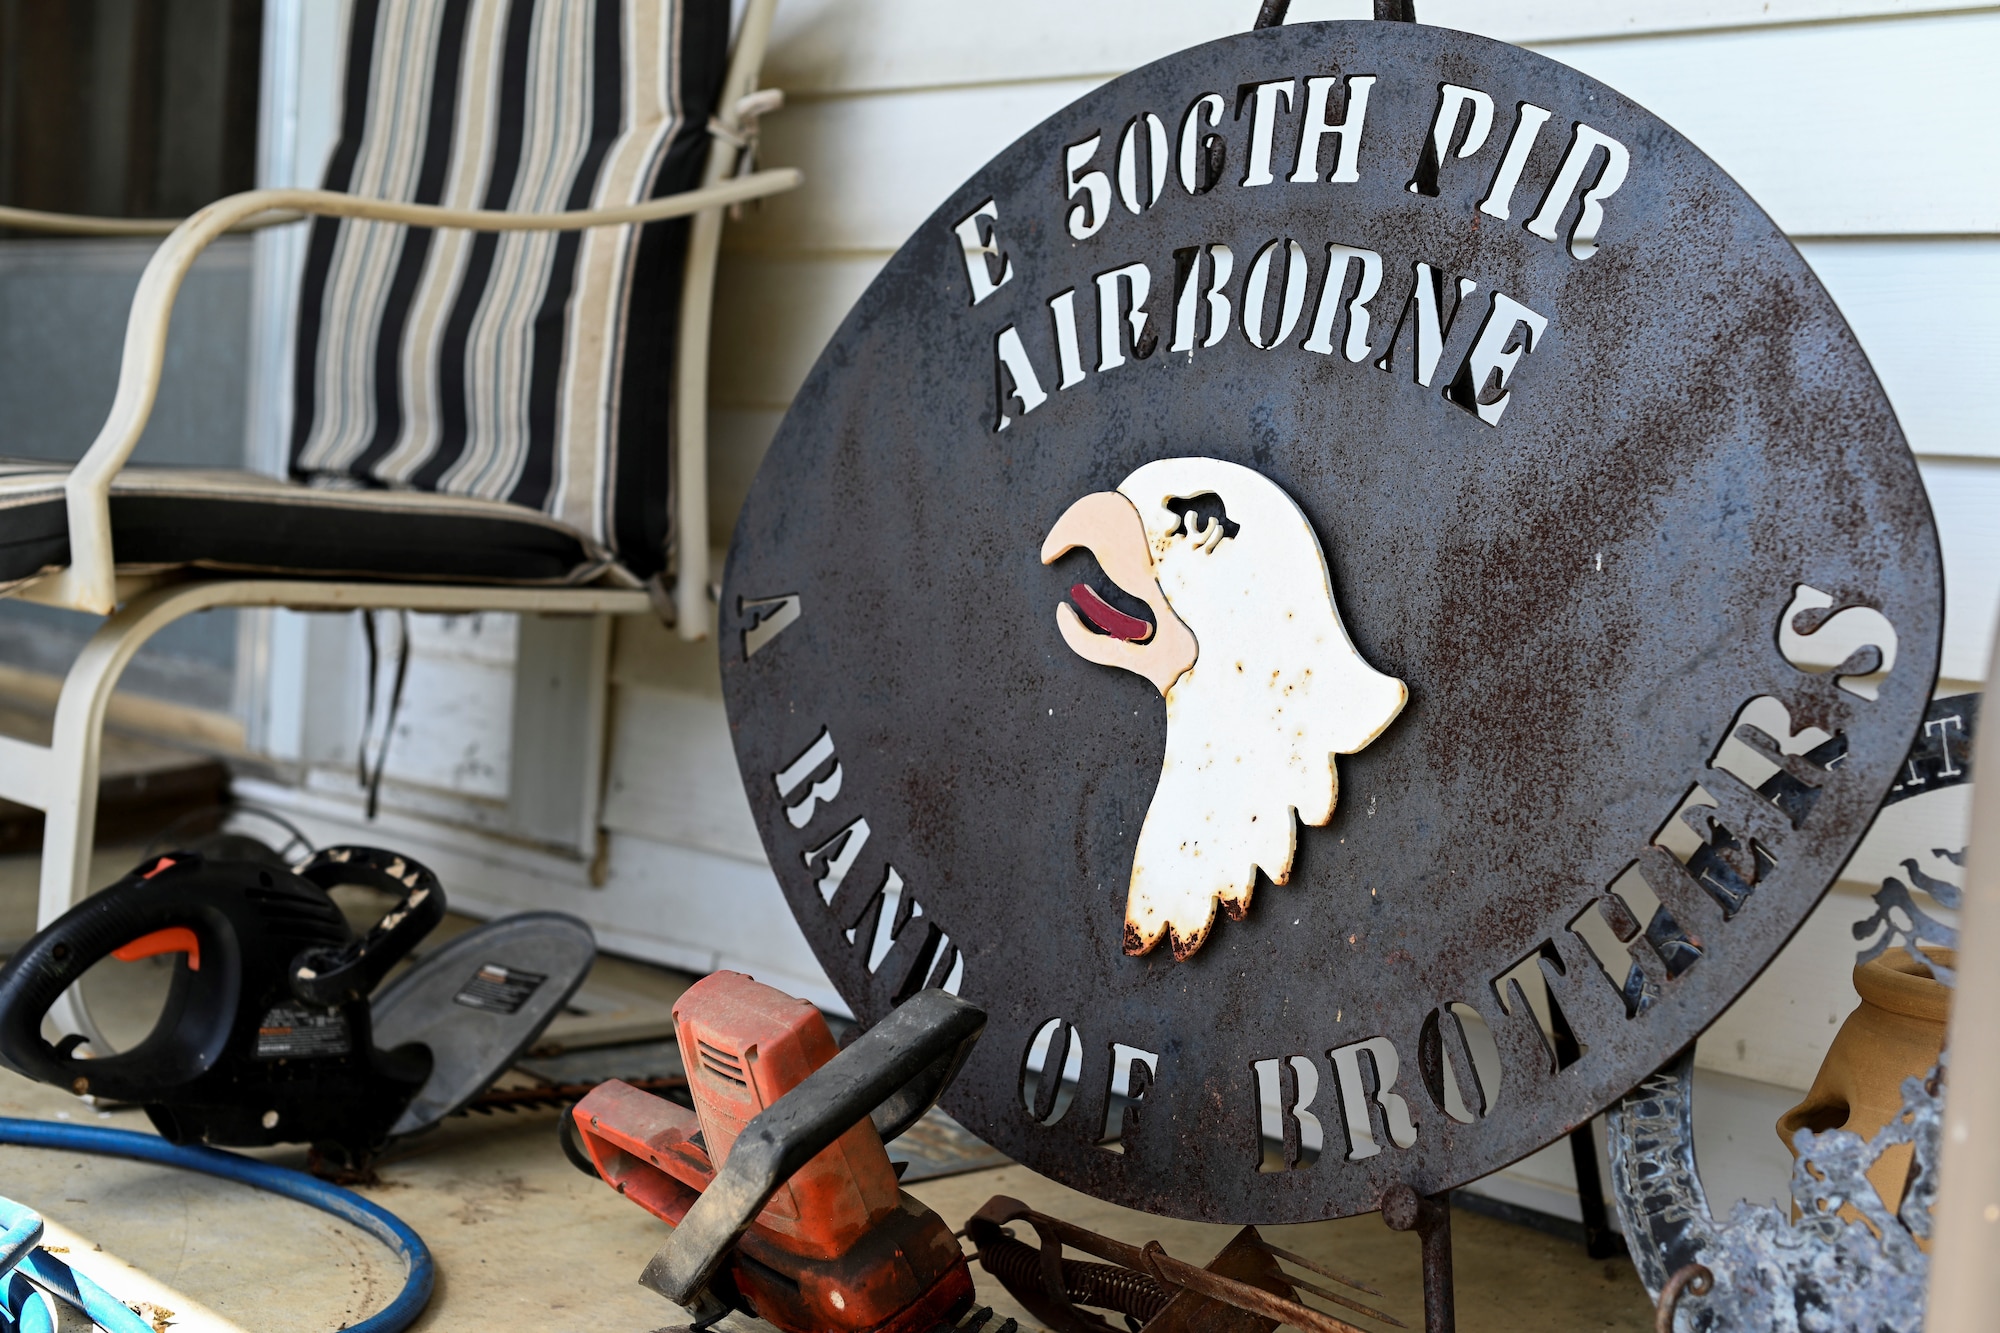 Bradford Freeman, assigned to ‘Easy’ Company, 2nd Battalion of the 506th Parachute Infantry Regiment of the 101st Airborne Division, has memorabilia on his porch. The popular television show ‘Band of Brothers’ depicted Freeman and his achievements with the help of many Easy Company team members. (U.S. Air Force photo by Senior Airman Keith Holcomb)